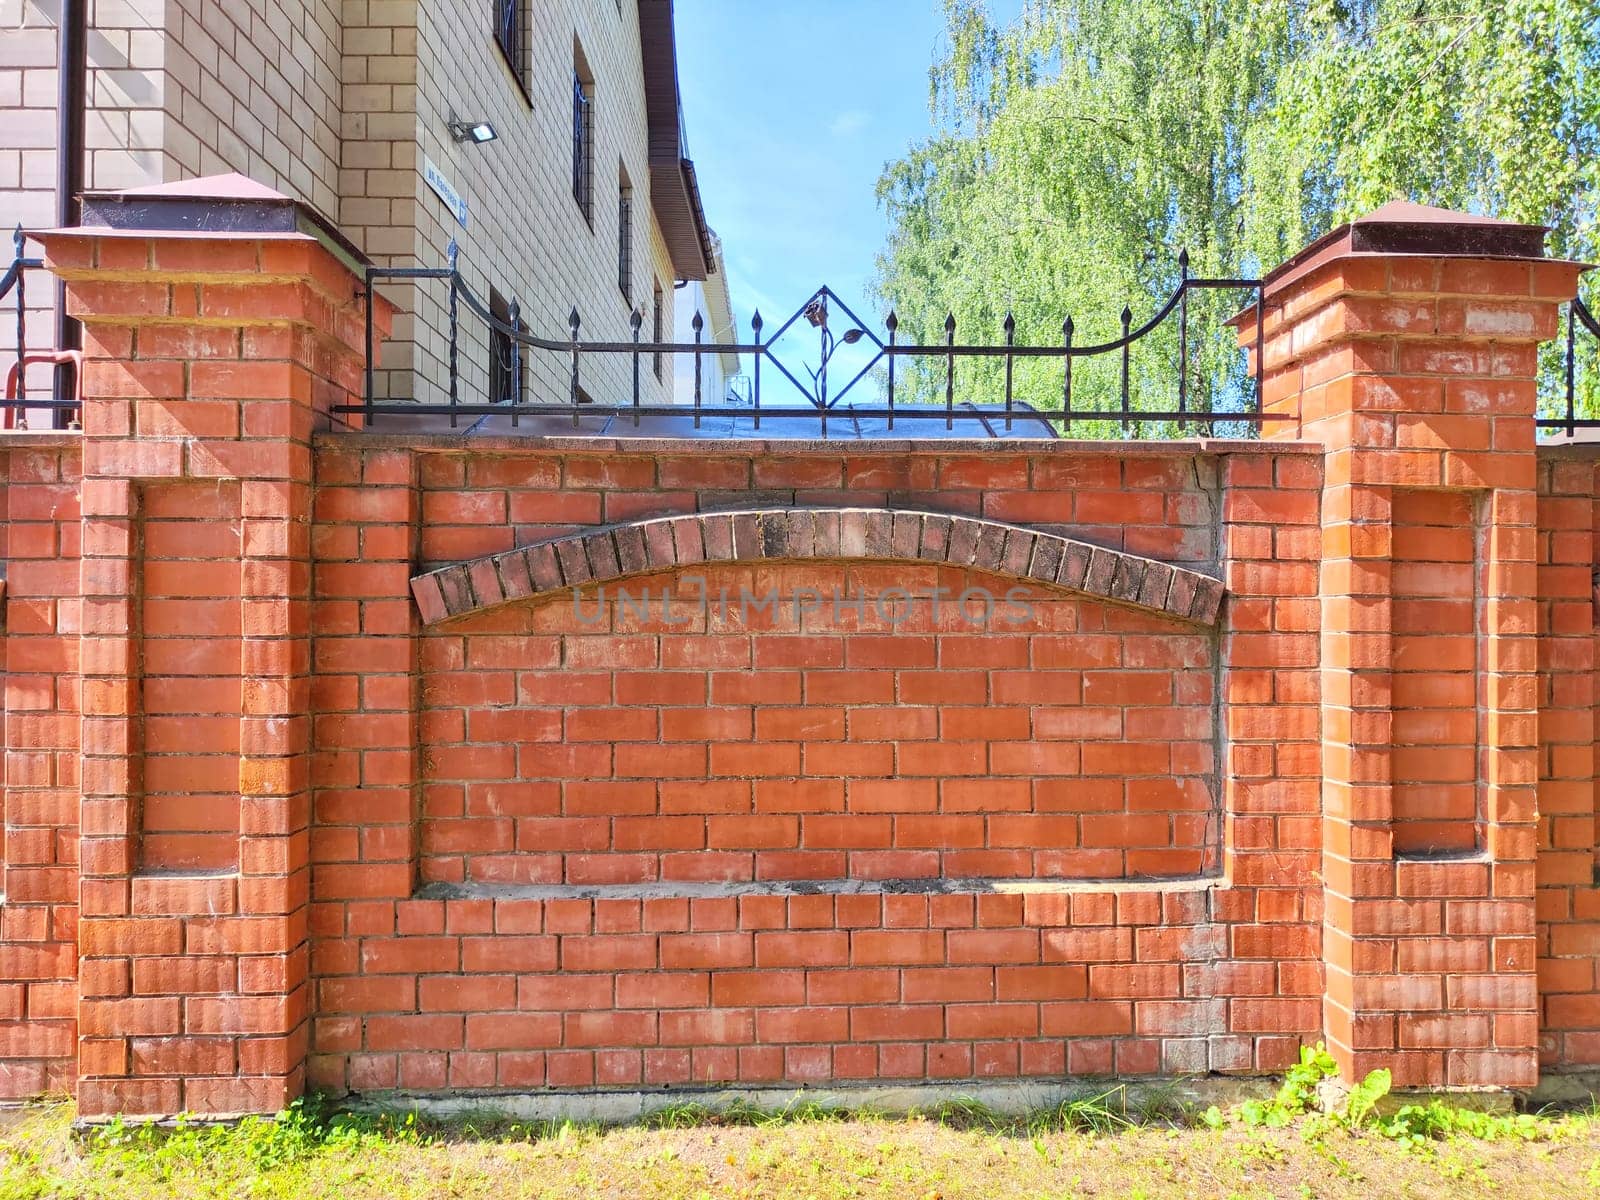 Red Brick Wall With Arch Detail in Urban Setting. Red brick wall featuring an arch design on sunny day